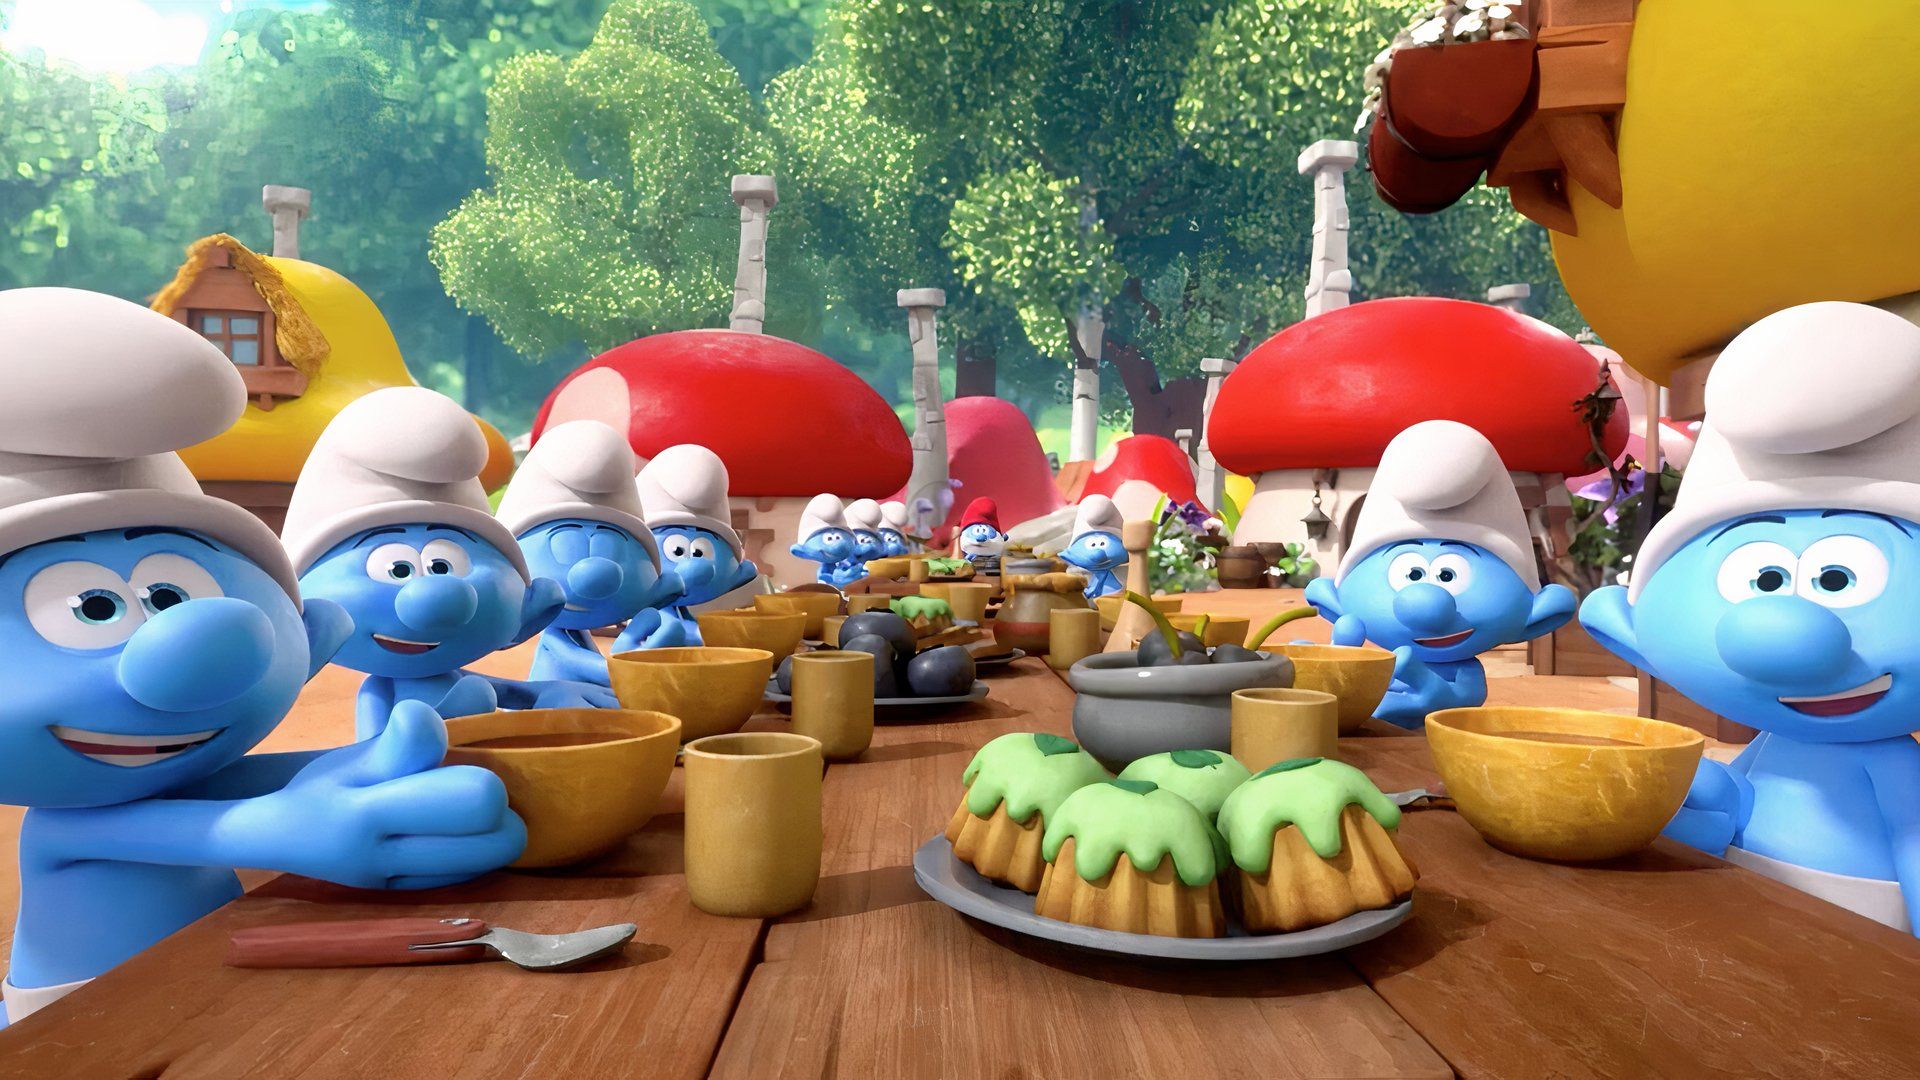 The Smurfs share a meal in The Smurfs